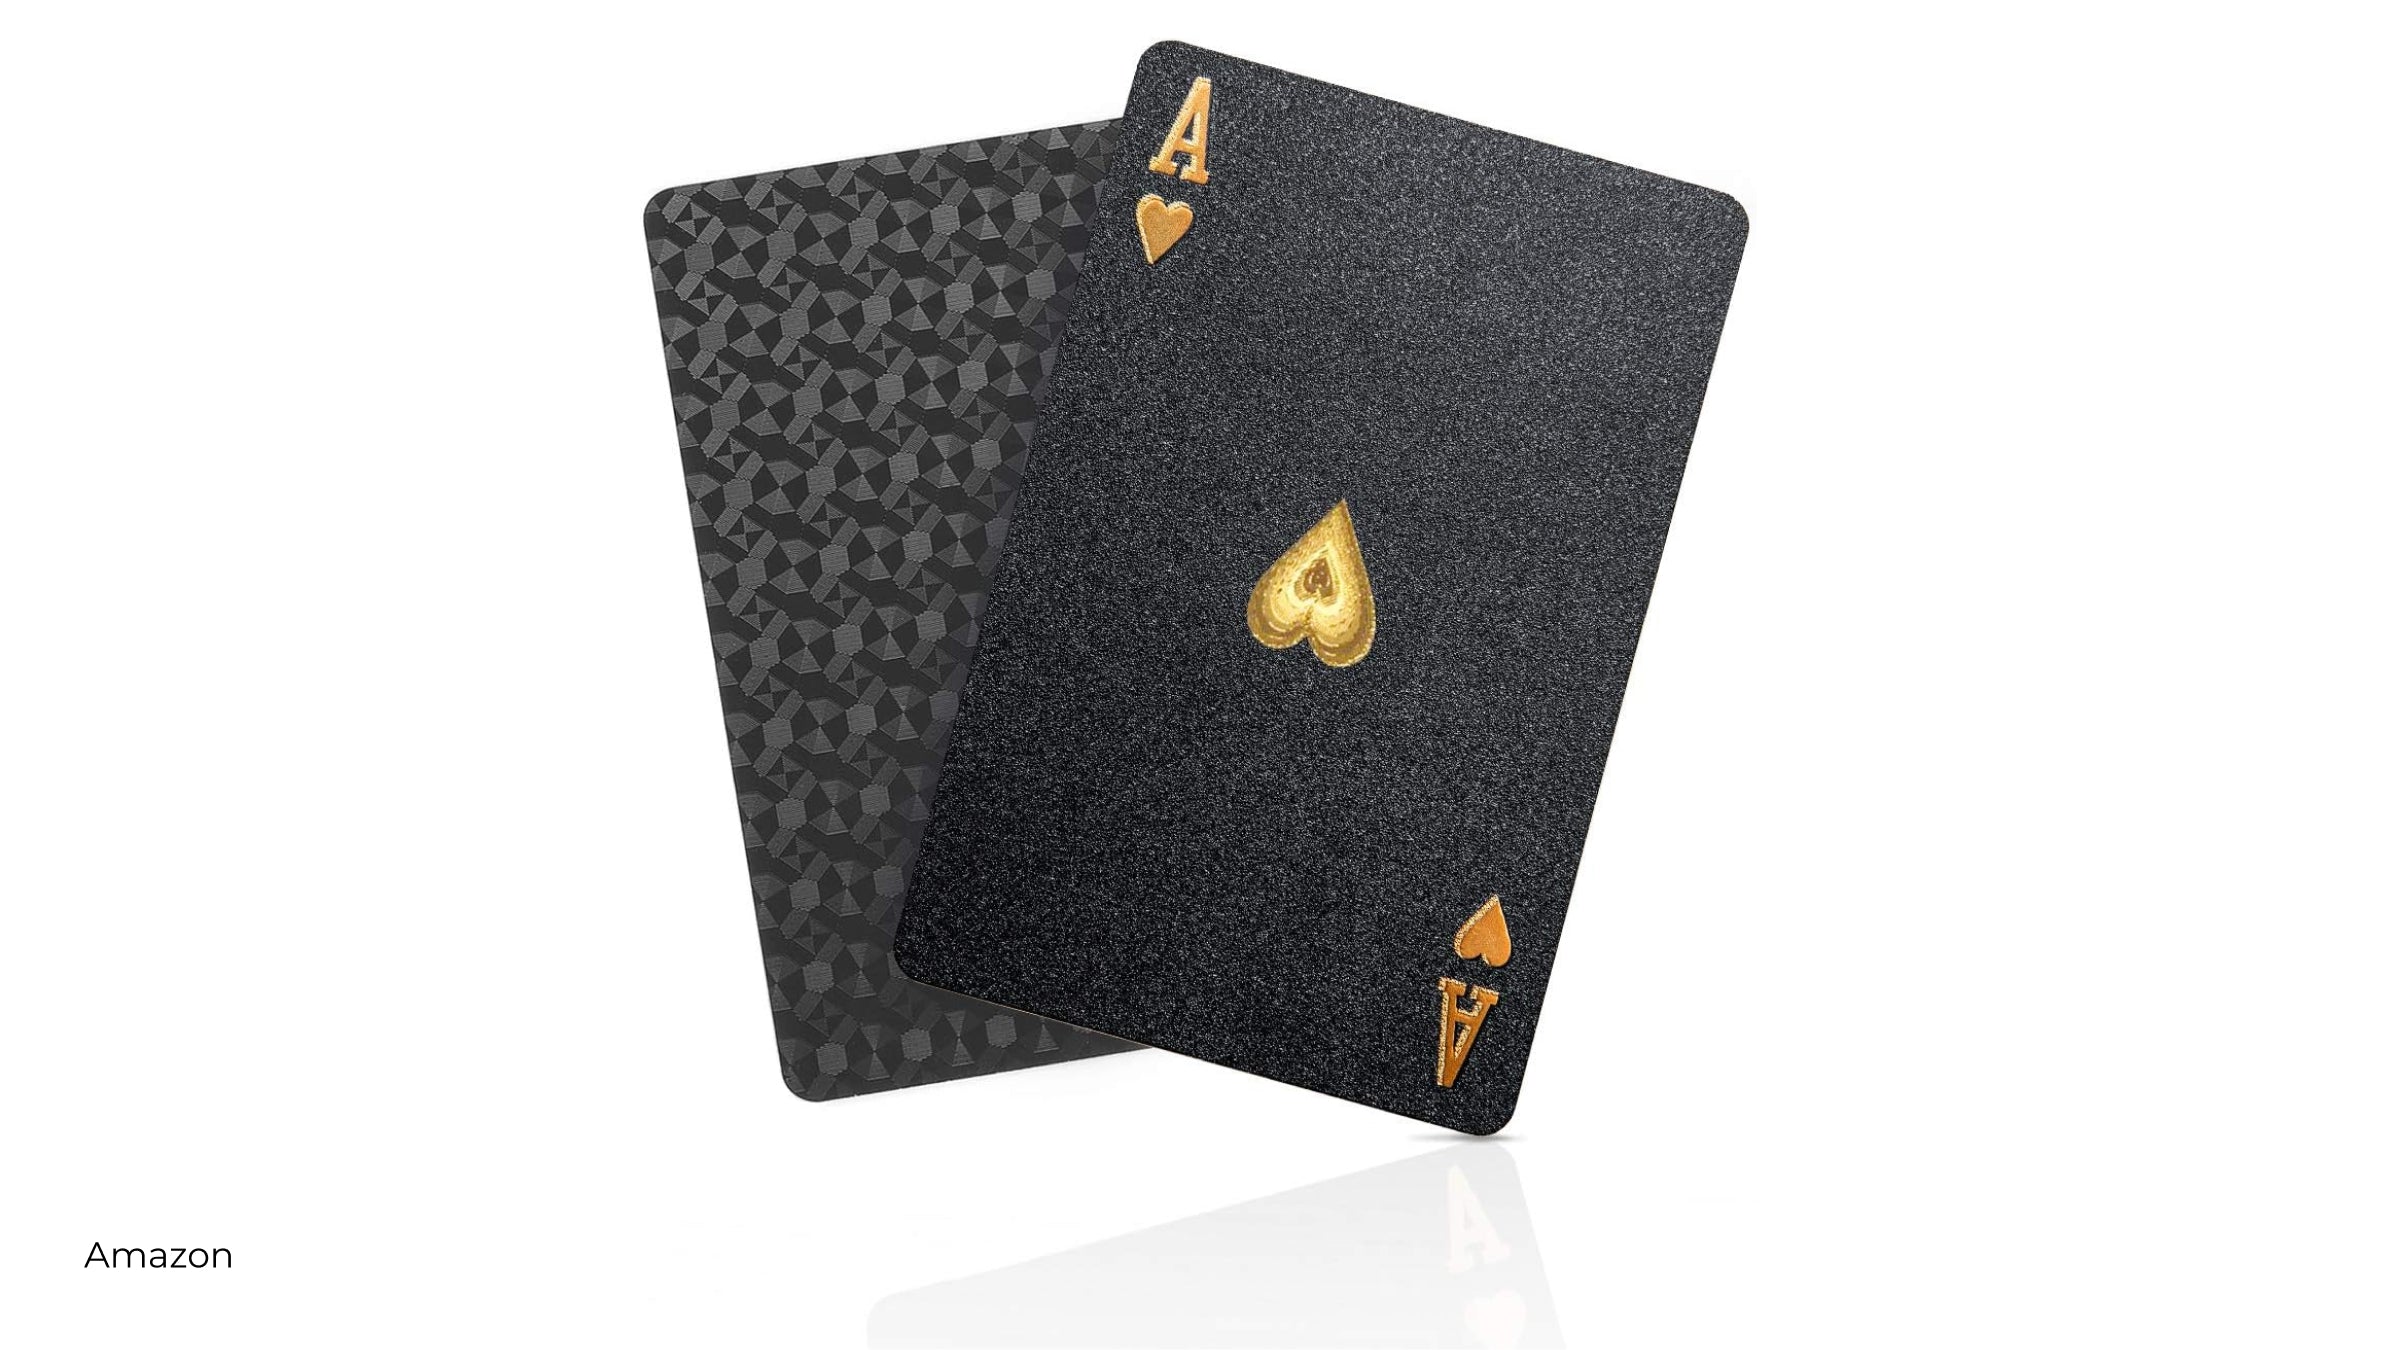 Black waterproof cards with gold lettering on Amazon